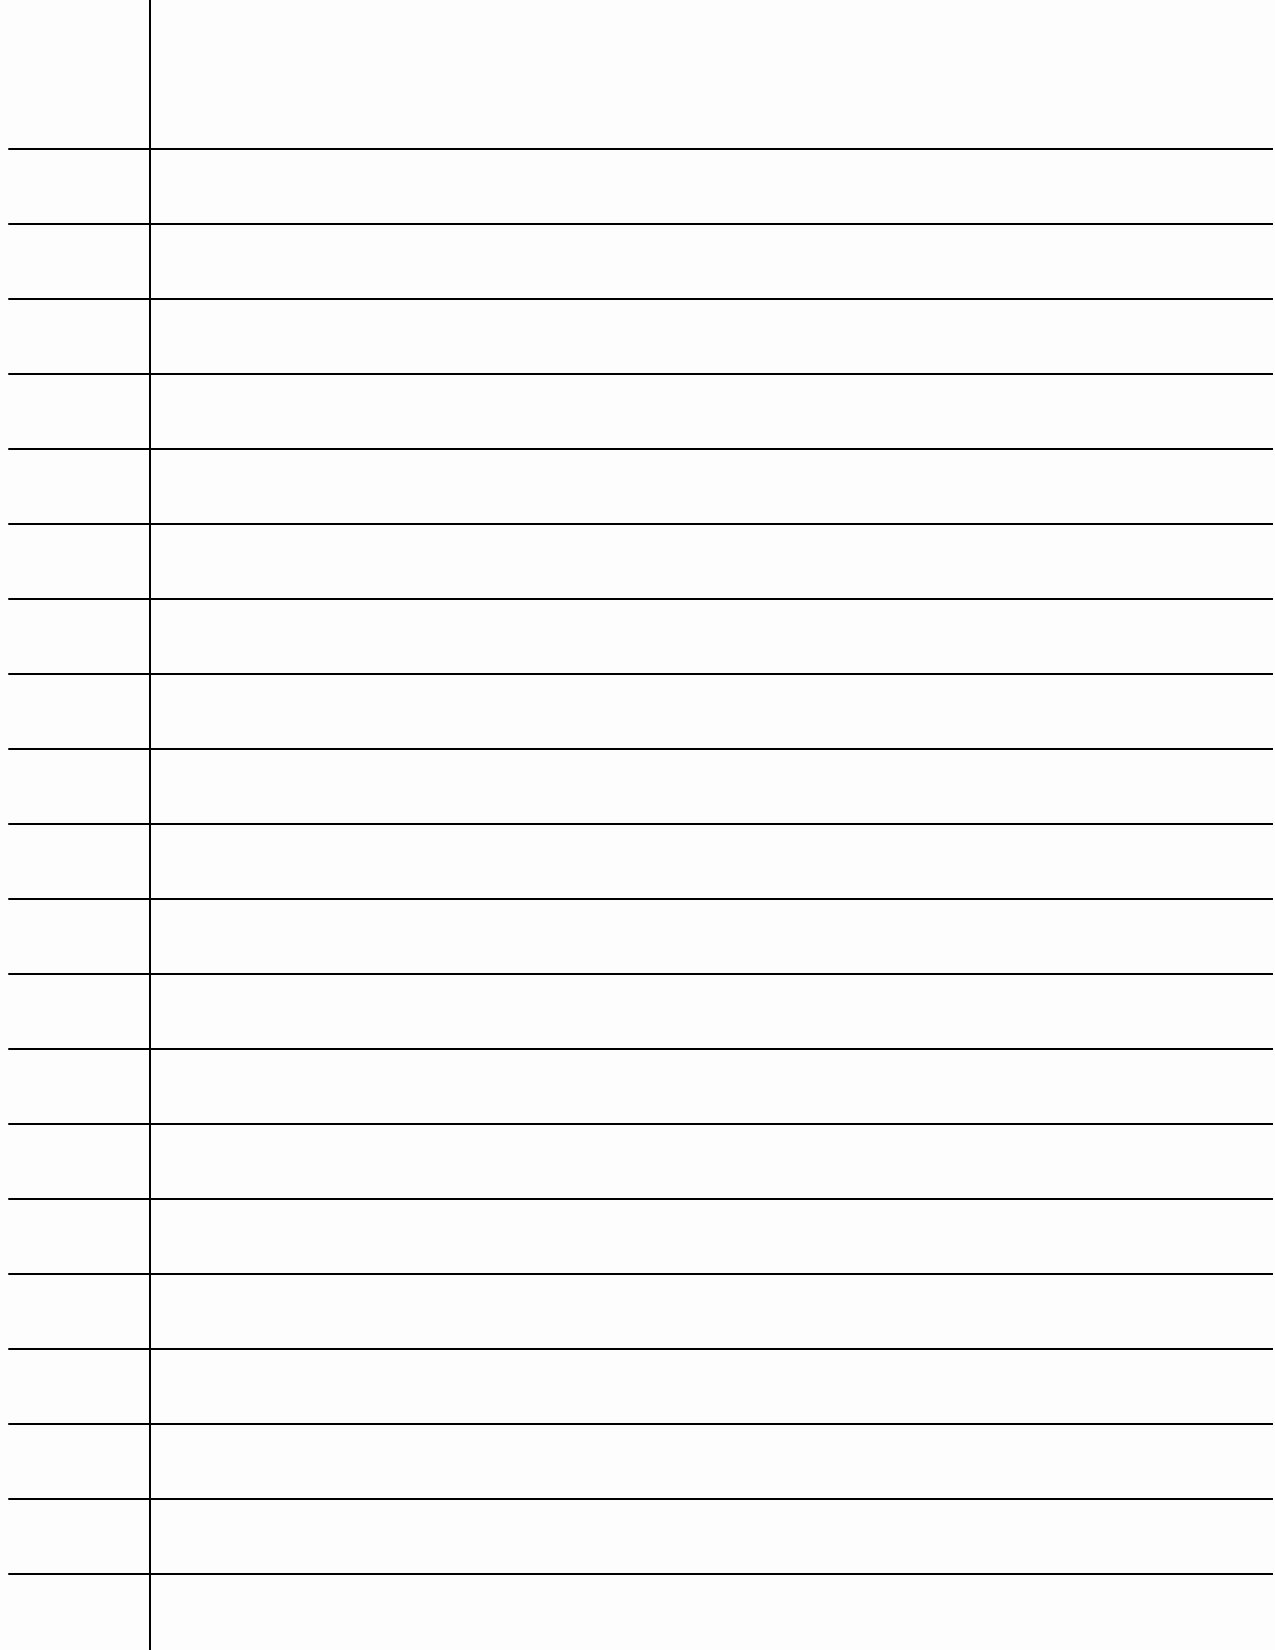 Printable Lined Paper Pdf Lovely Microsoft Word Lined Paper Help